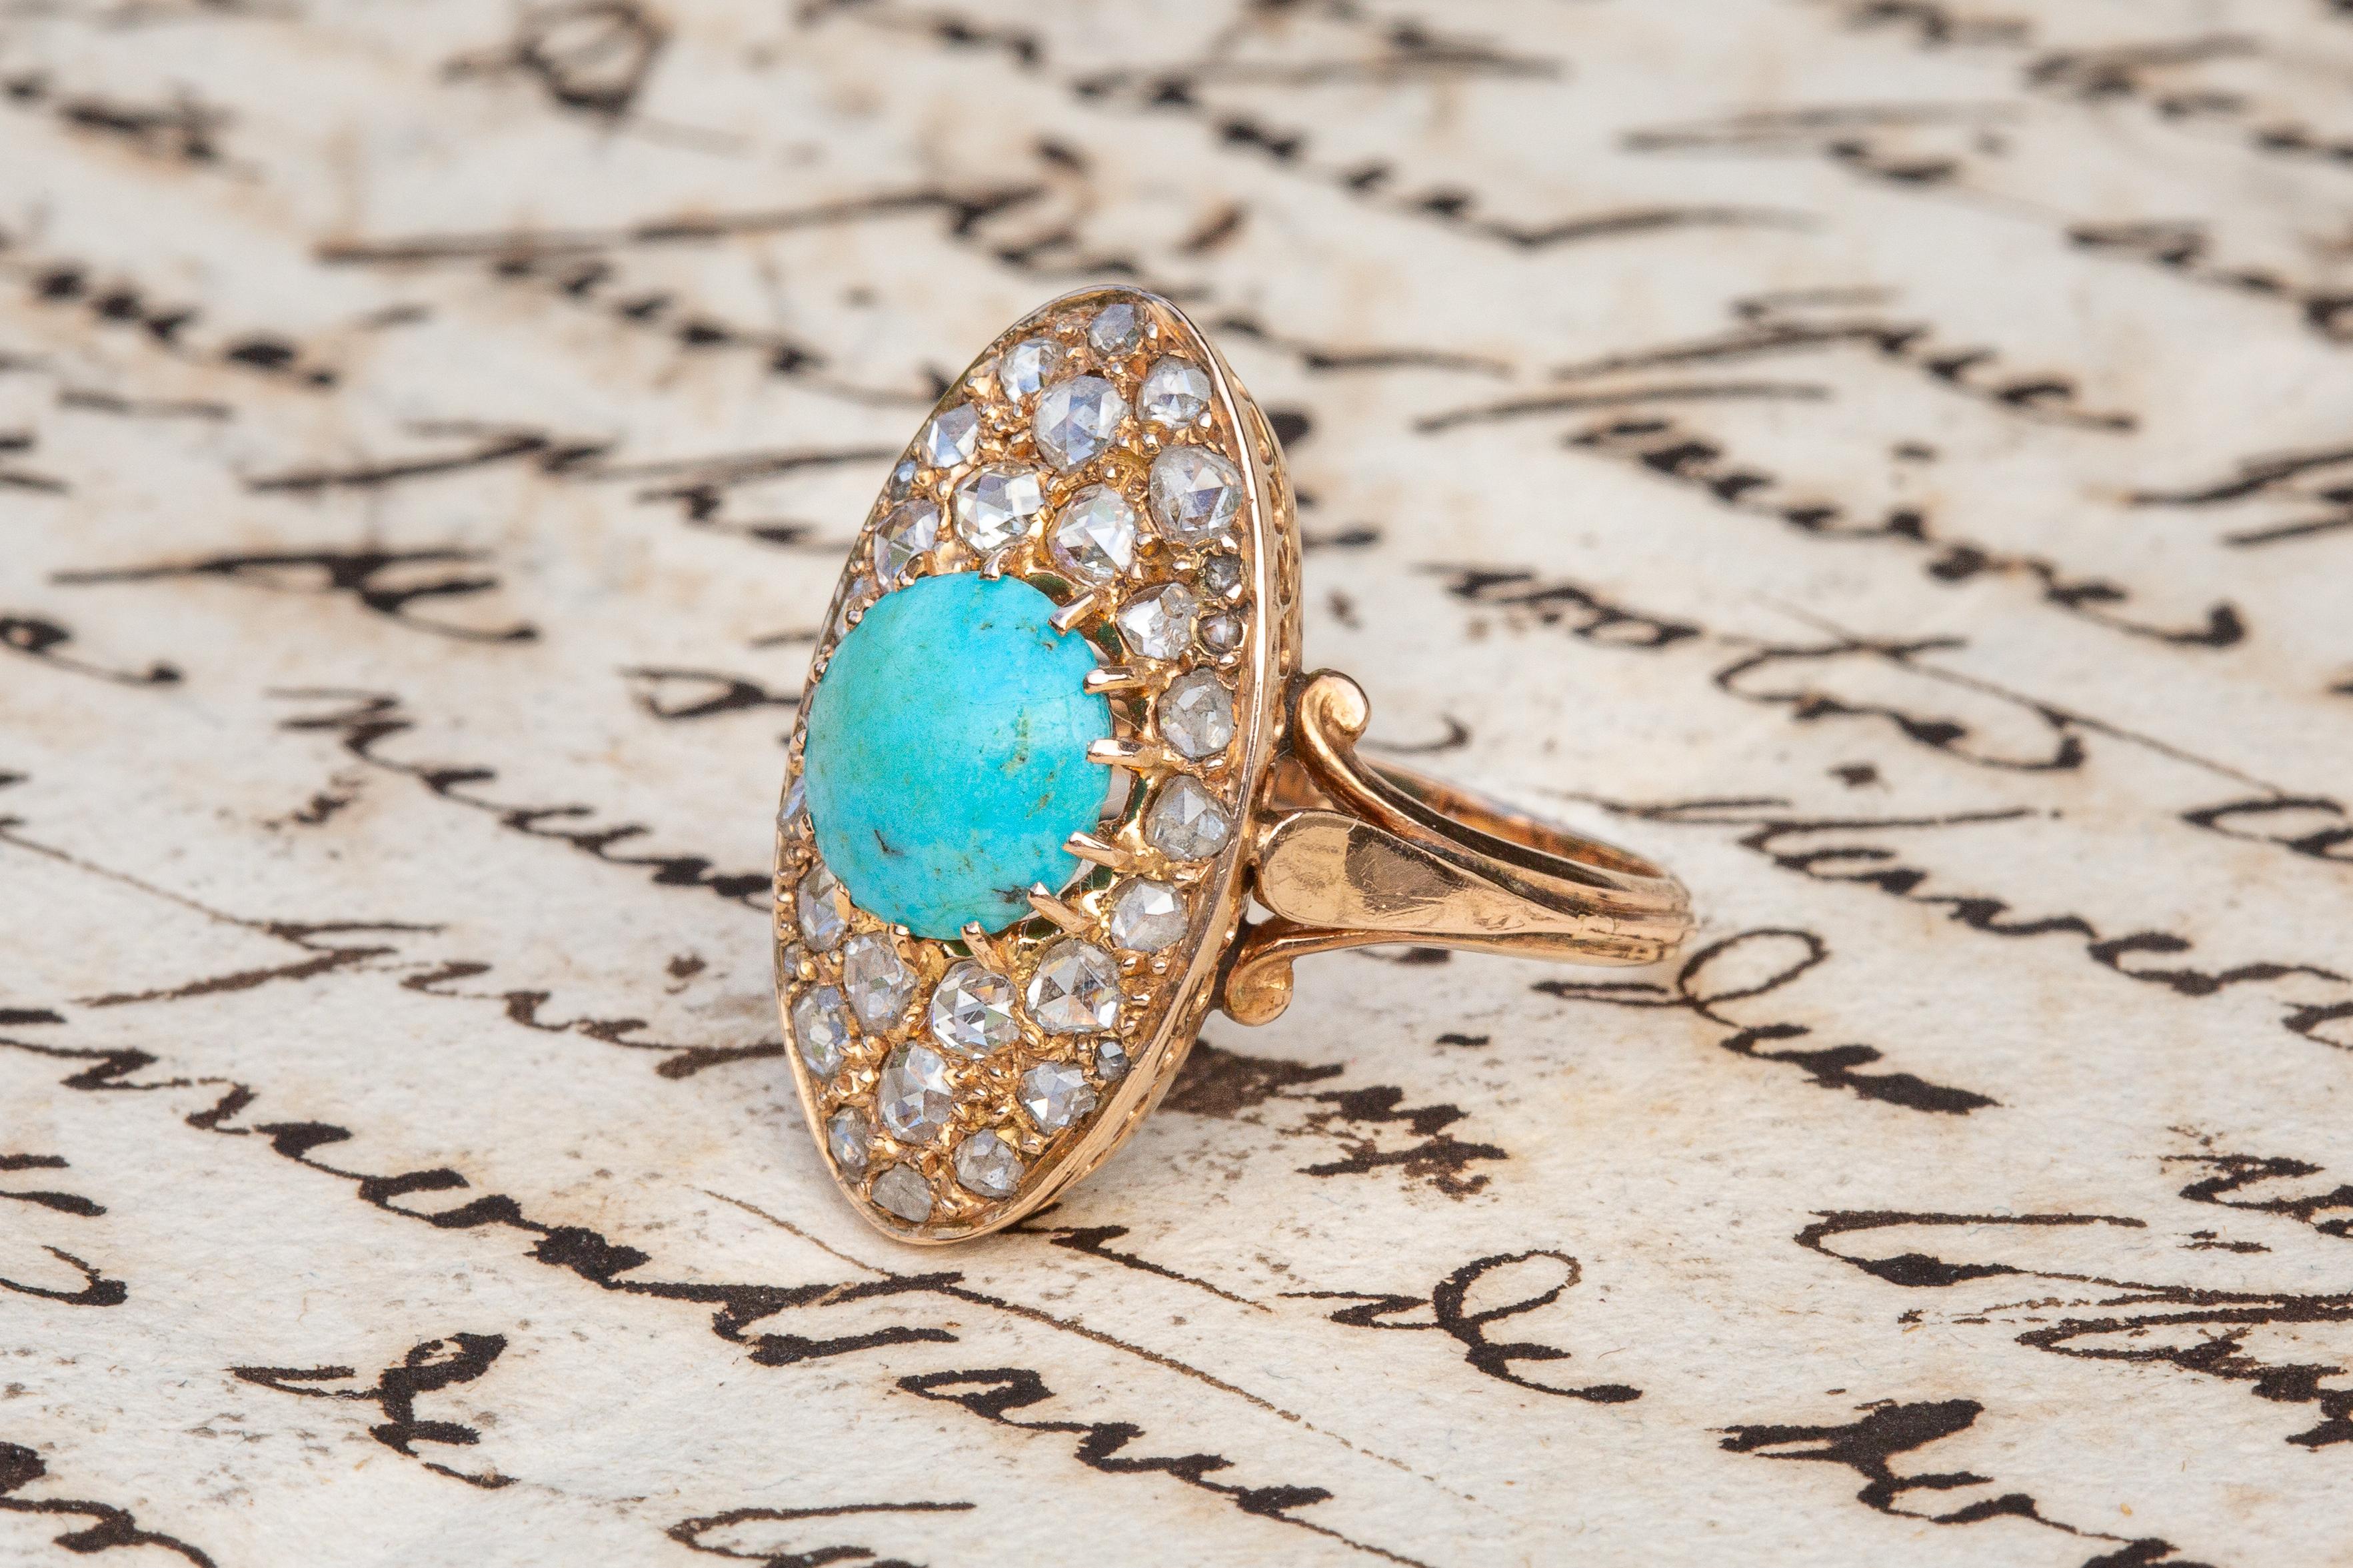 A stunning cluster ring dating to the late Victorian period circa 1880. This navette-shaped cluster is set with a large cabochon cut natural turquoise cabochon surrounded by 31 natural rose cut diamonds of varying sizes. The grooved D-shaped band is